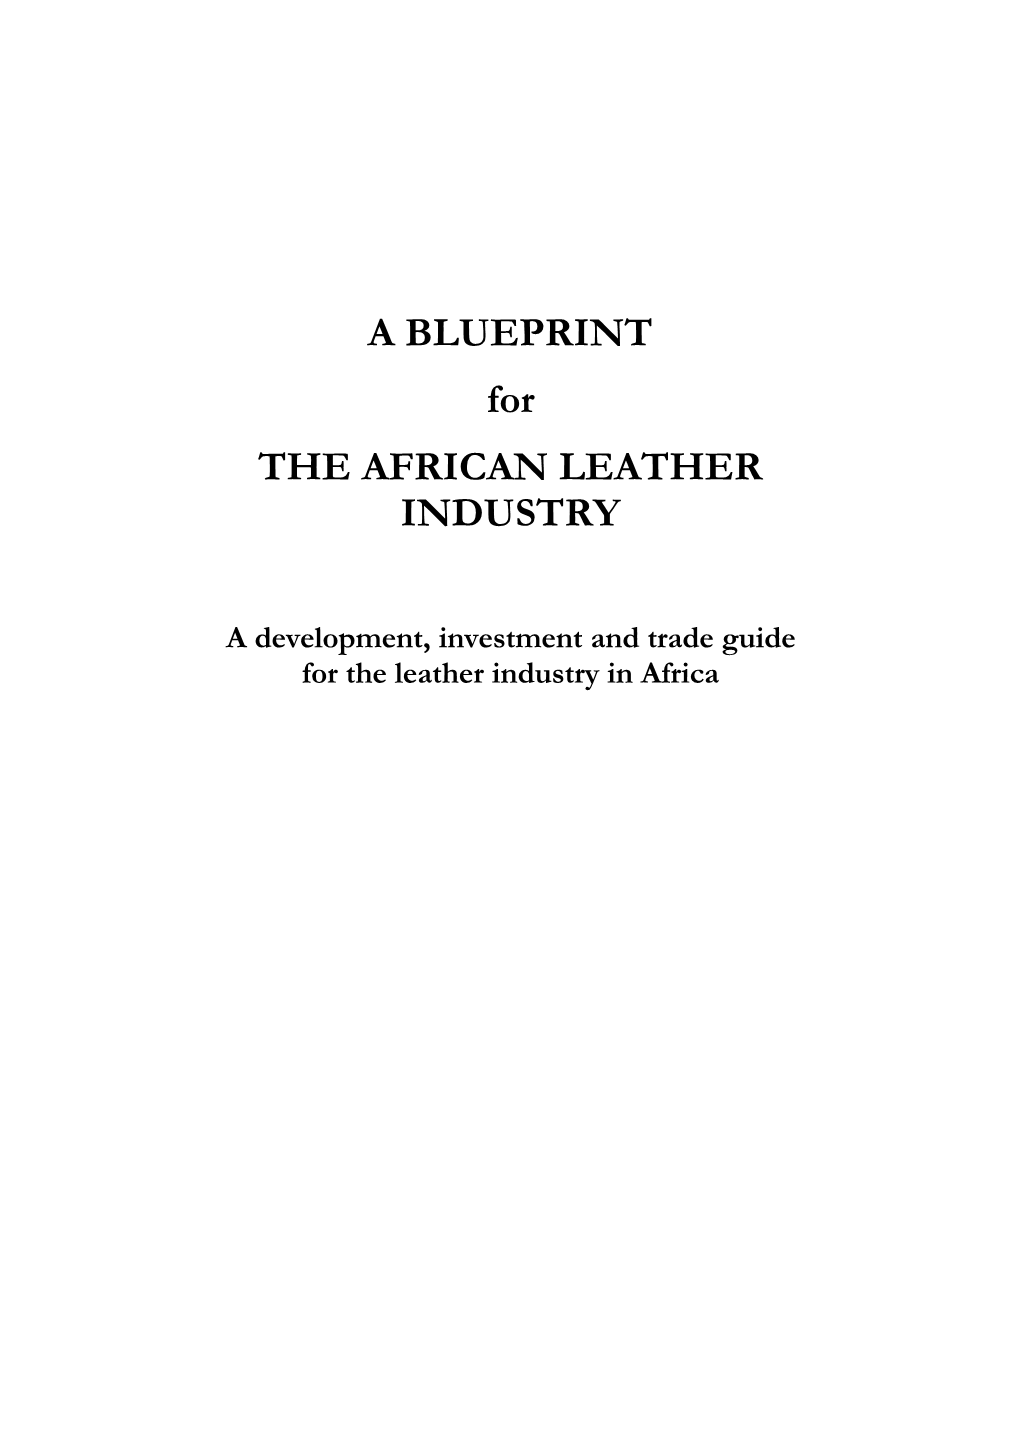 A BLUEPRINT for the AFRICAN LEATHER INDUSTRY